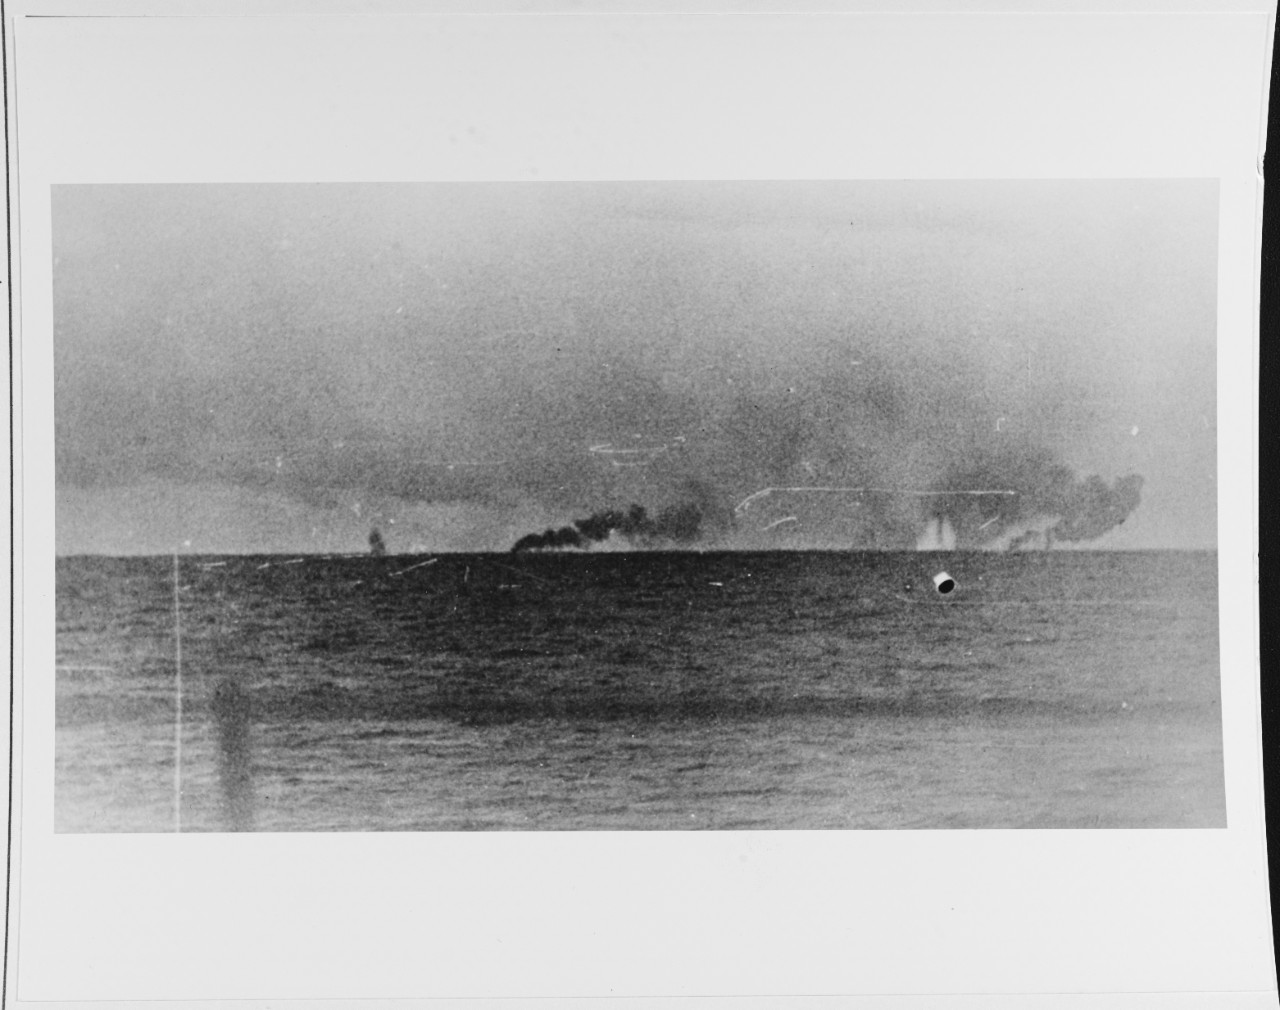 Photo #: NH 69731  Battle of the Denmark Strait, 24 May 1941